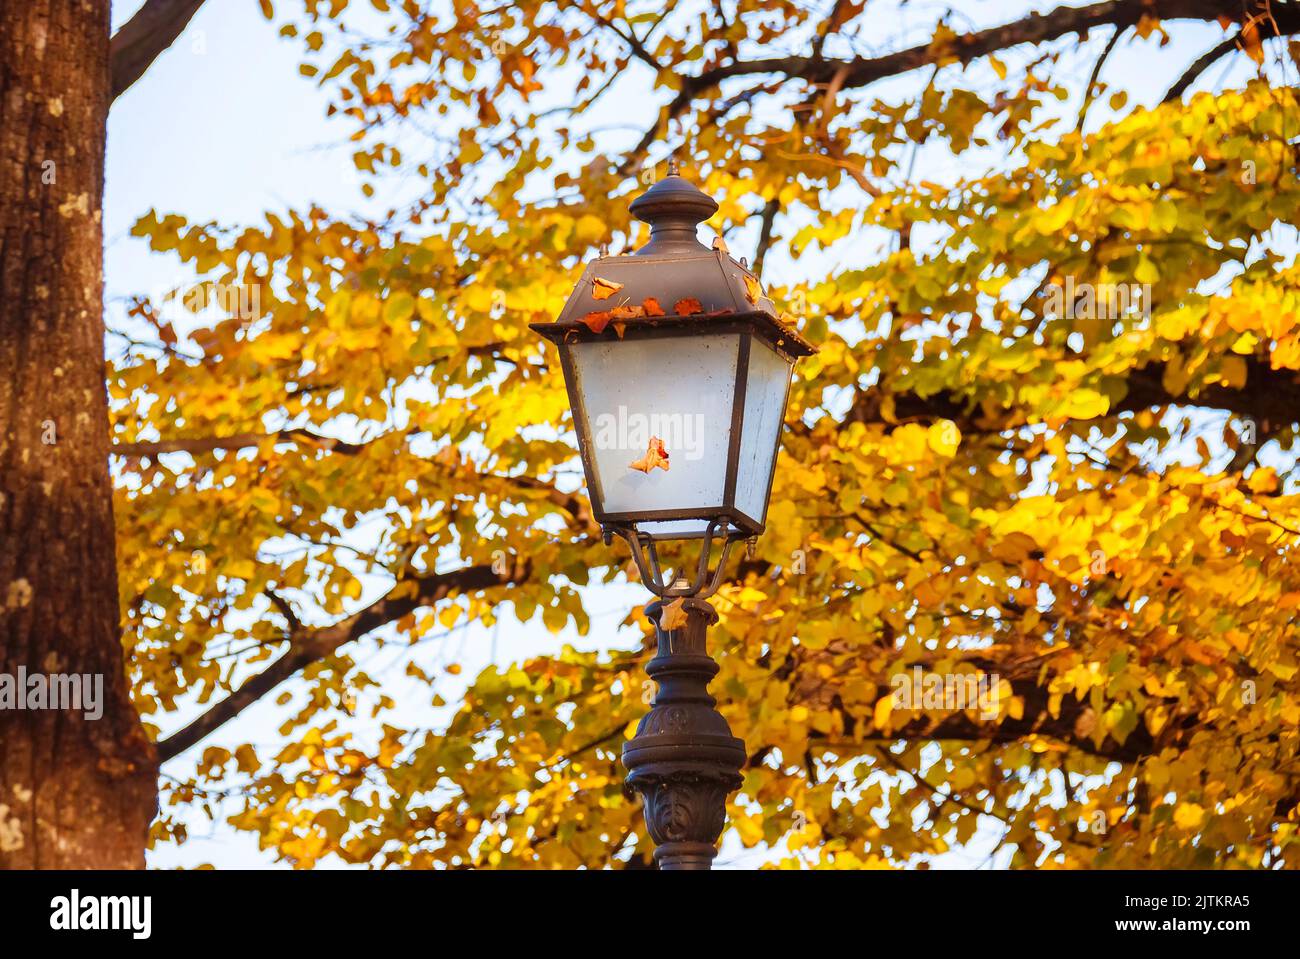 Autumn and foliage in the park. Vintage street lamp among autumnal leaves Stock Photo